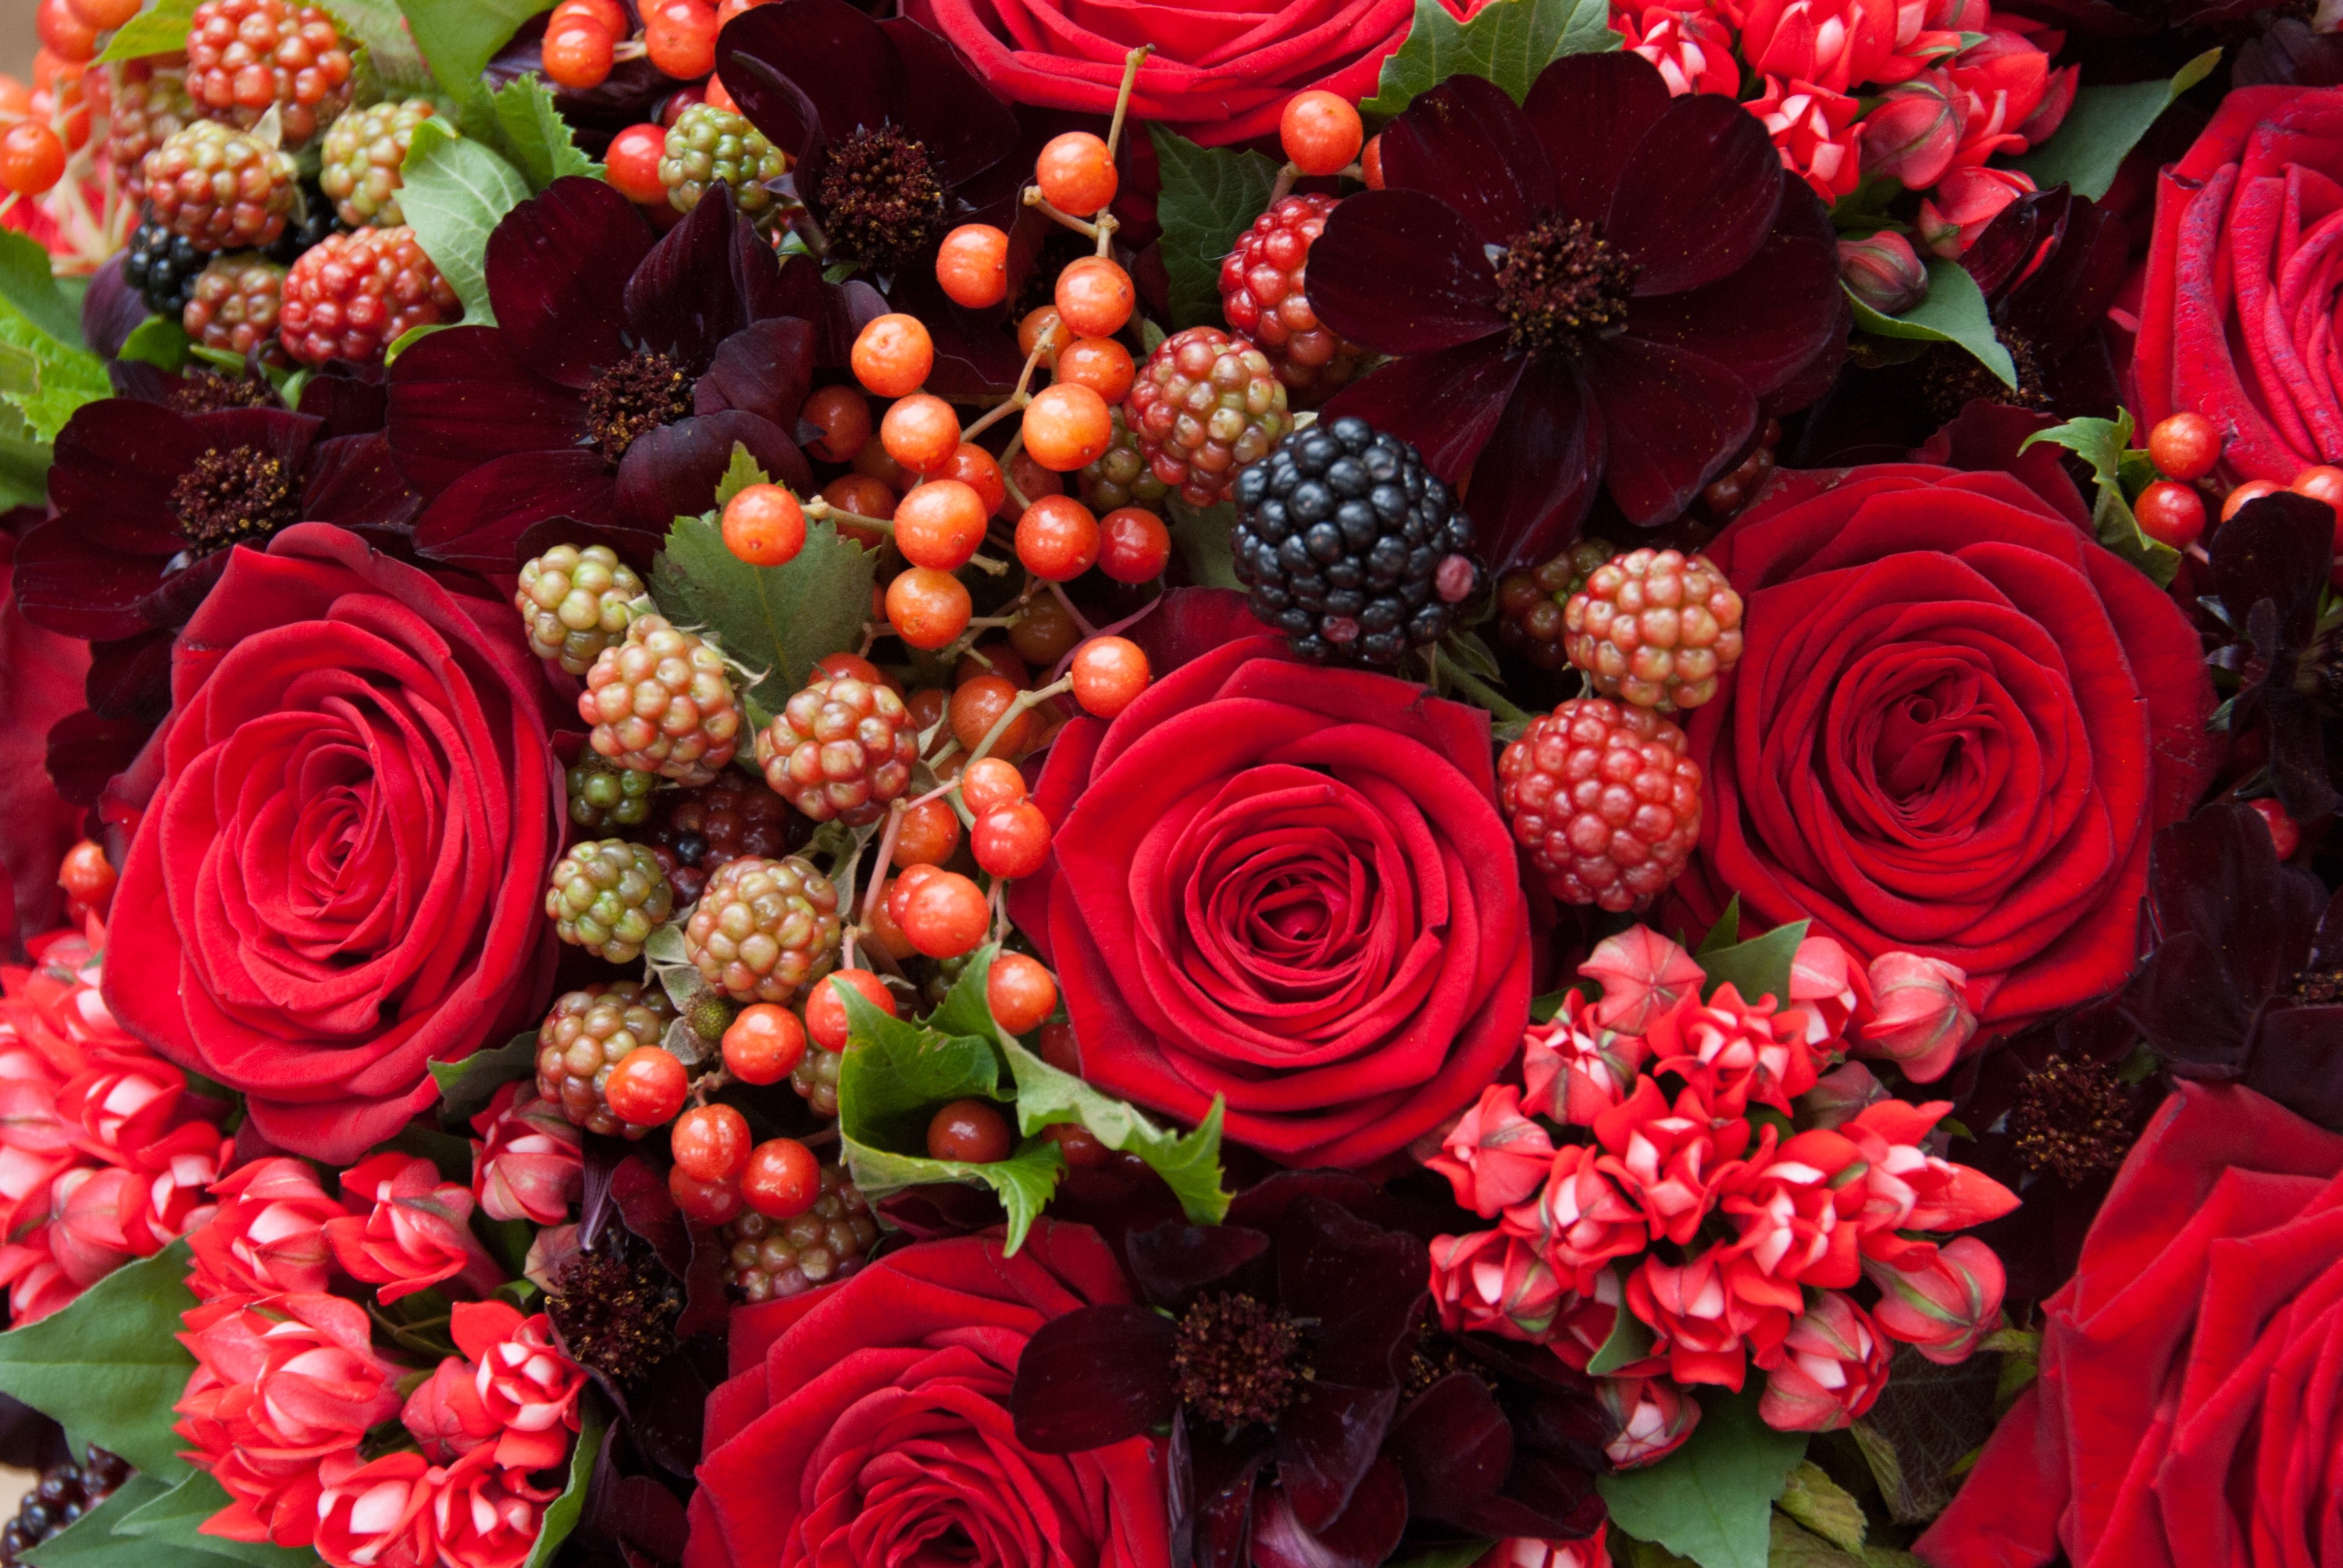 Red-Naomi-bouquets-by-Ivvo-Markou- 1